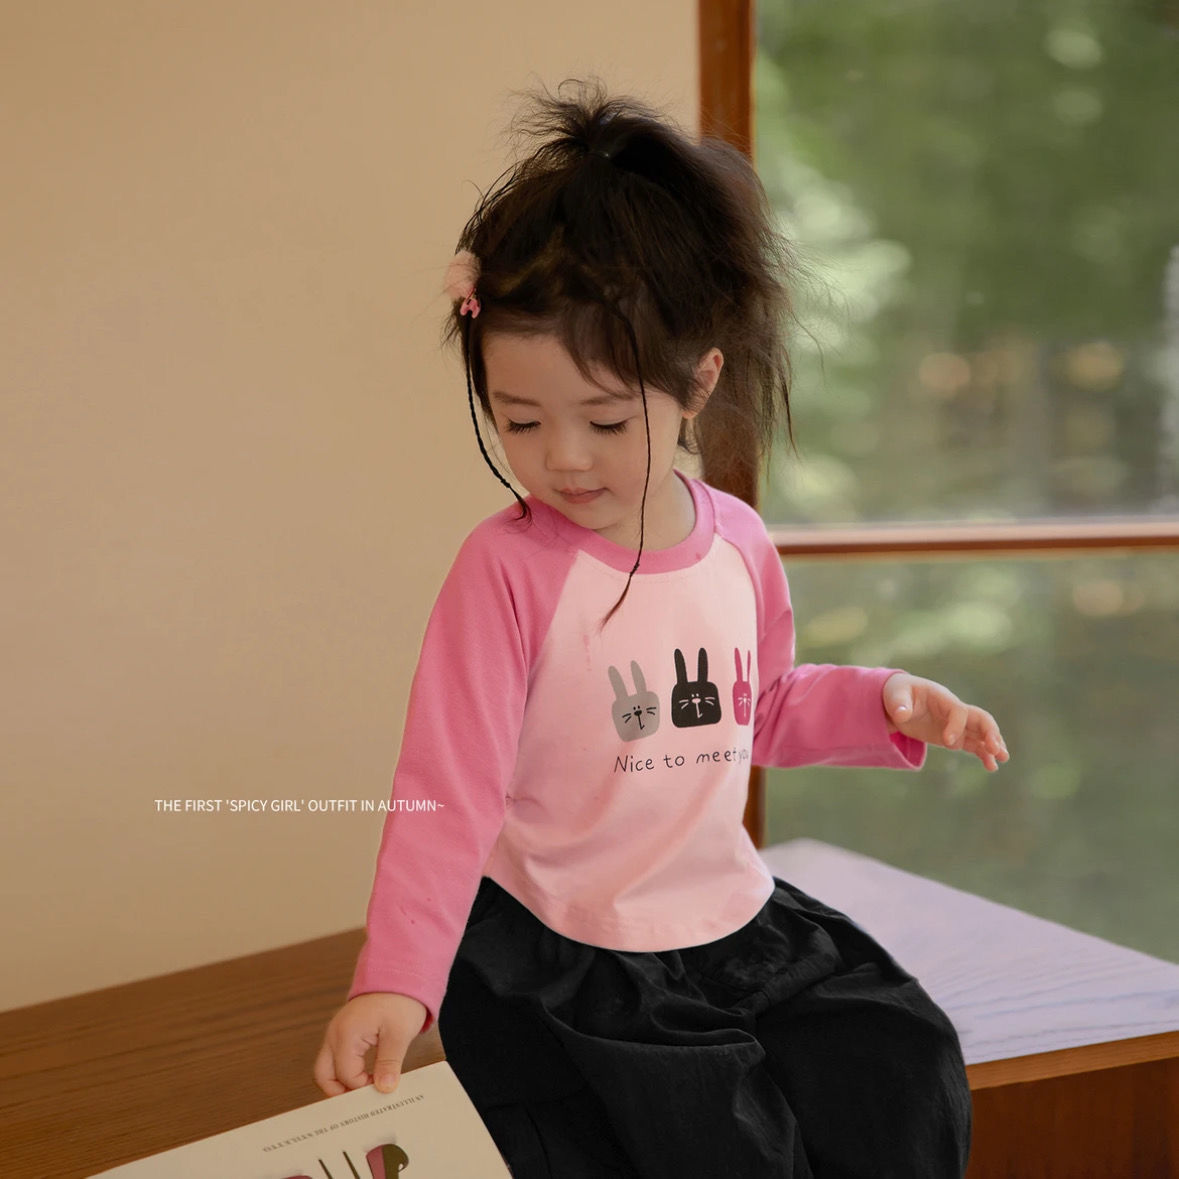 Pure cotton baby girl long-sleeved T-shirt raglan sleeves slim fit  children's new autumn style tops bottoming shirt trendy